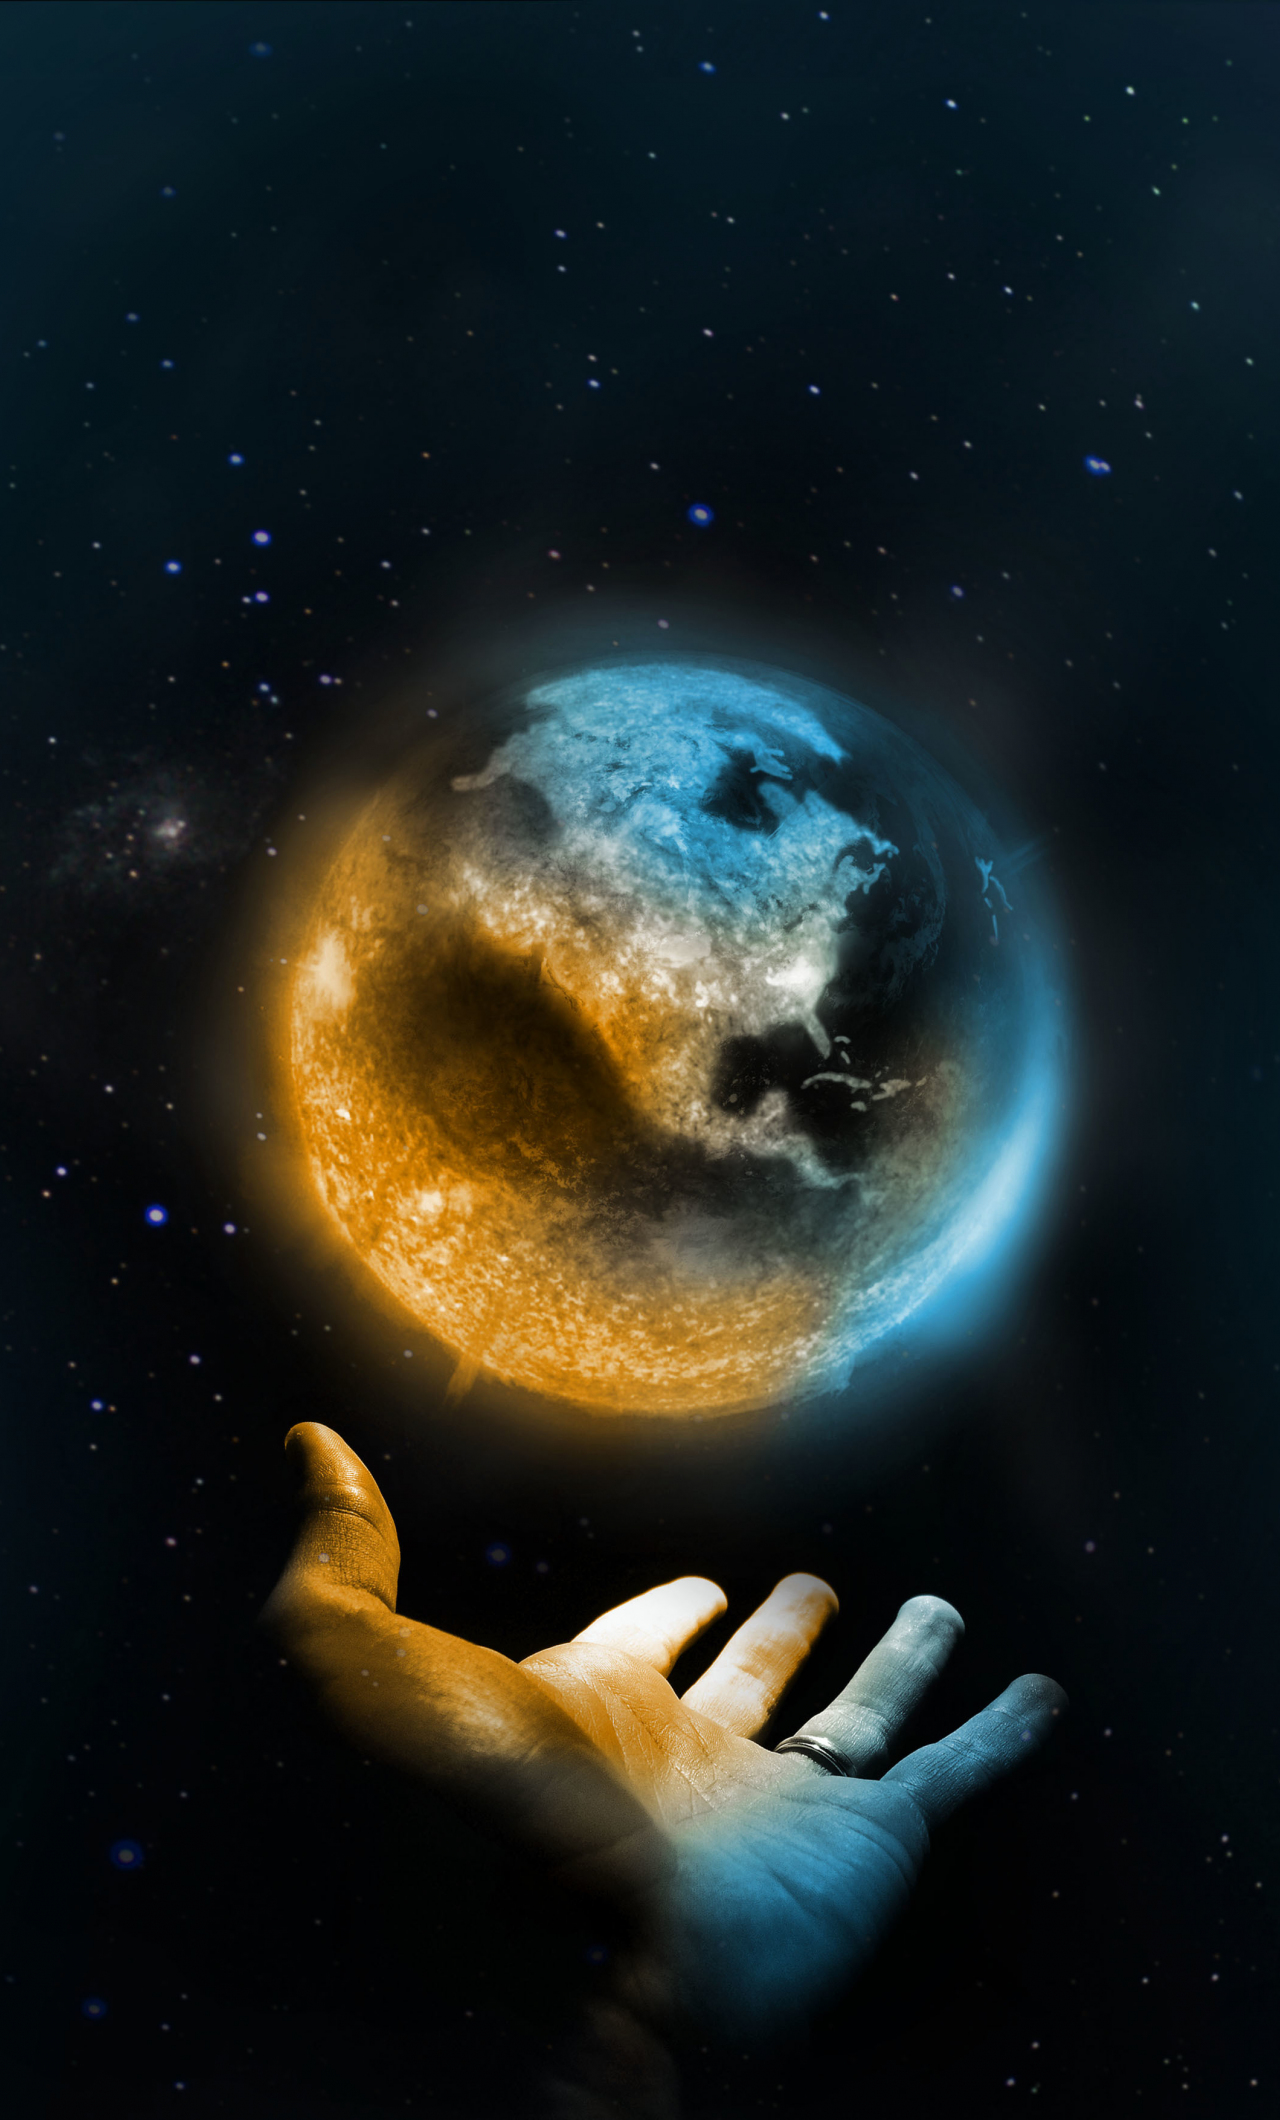 Download wallpaper 1280x2120 hand and earth, photoshop, iphone 6 plus,  1280x2120 hd background, 16516